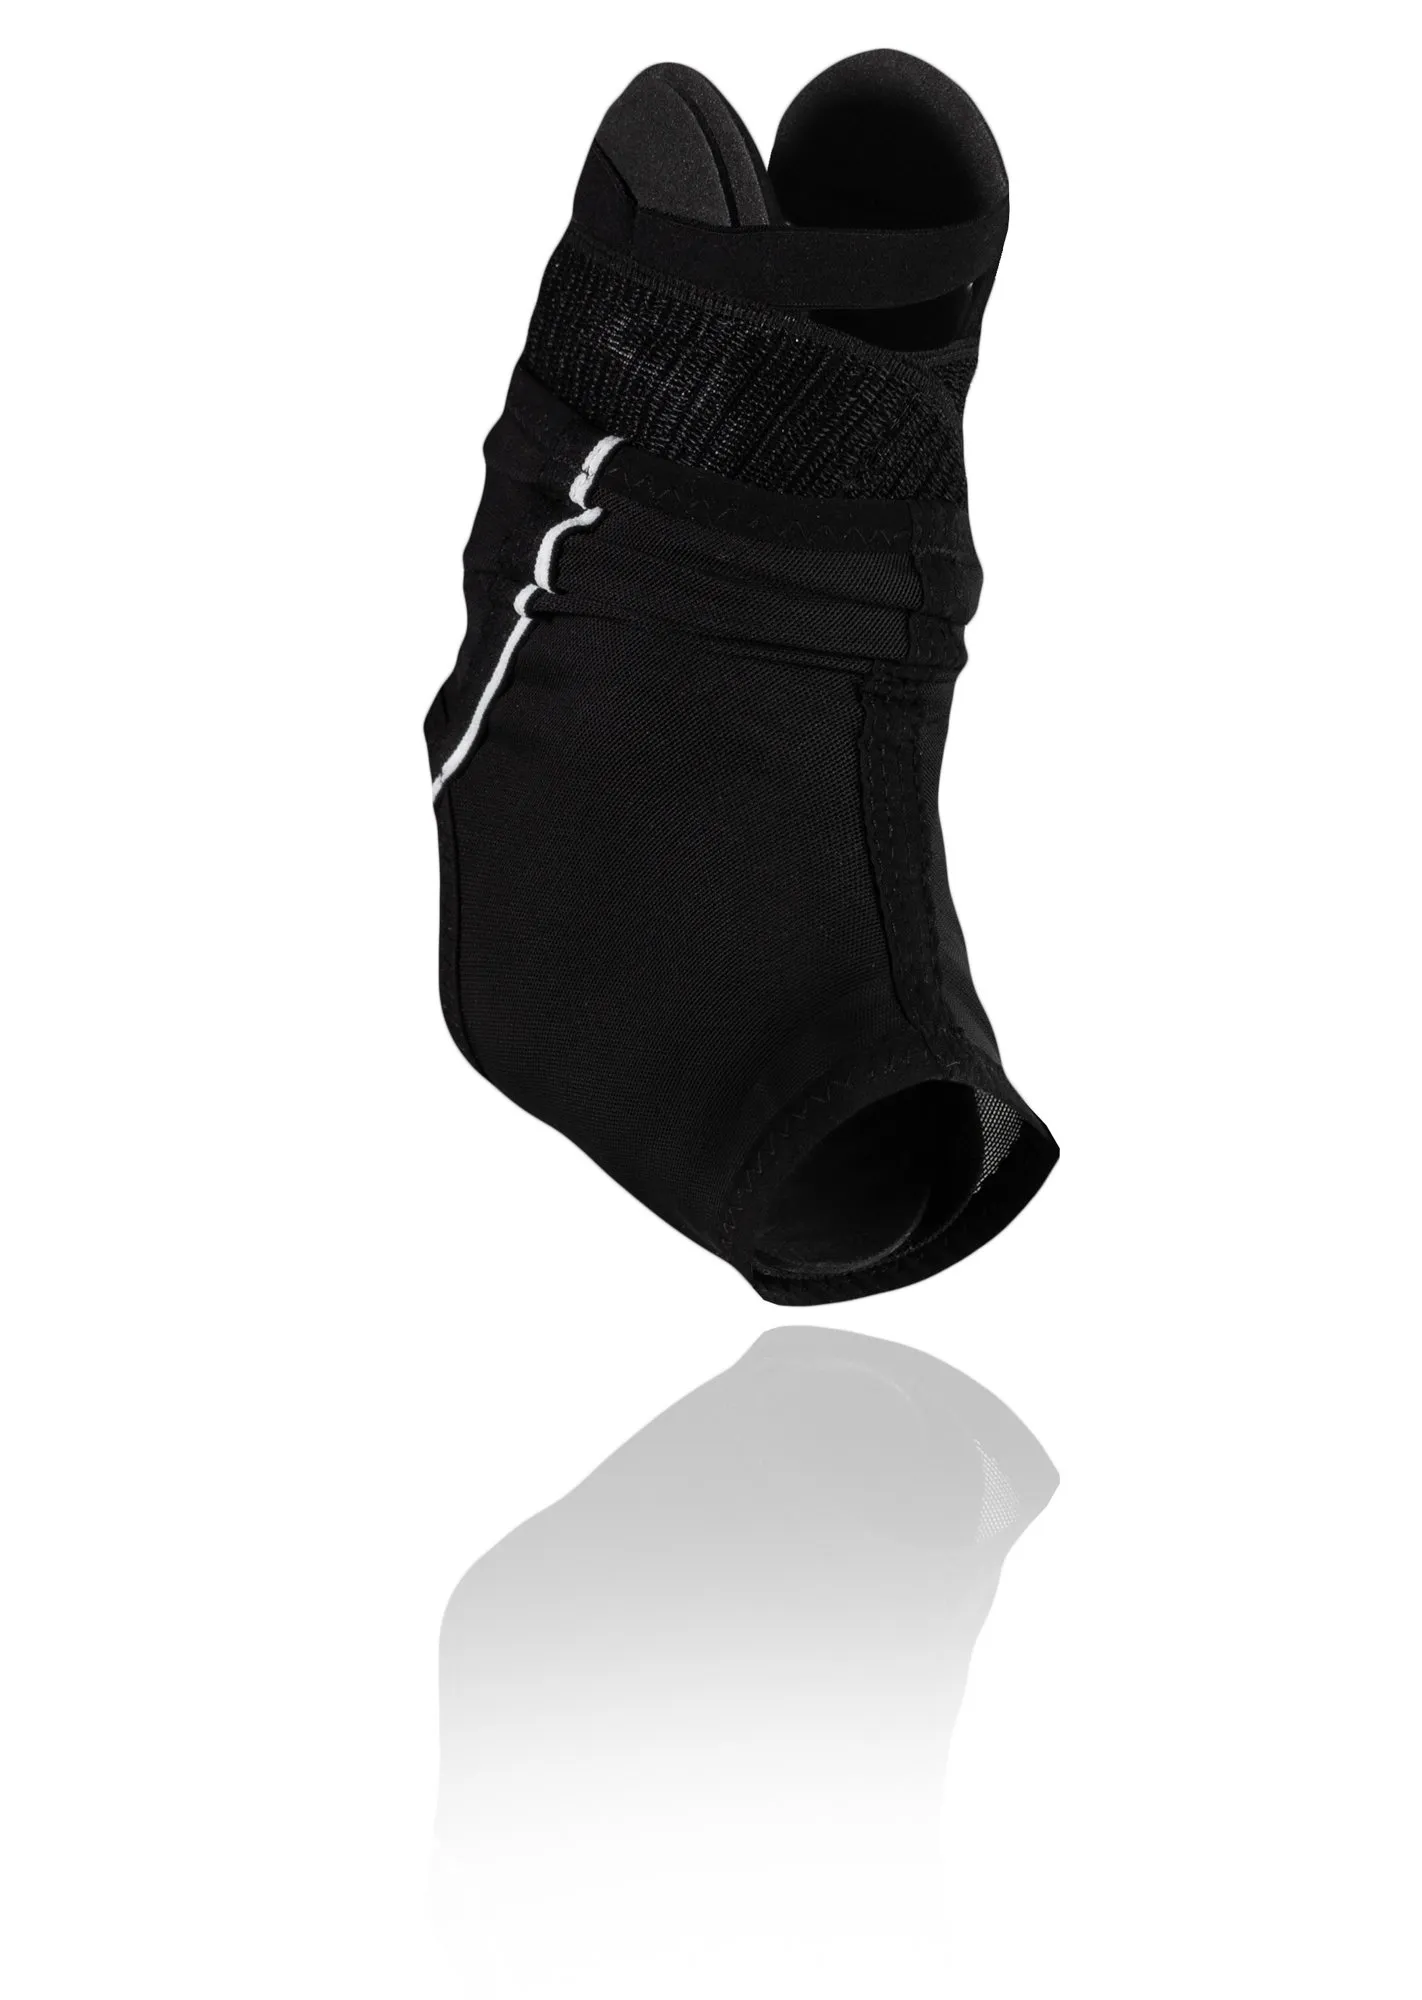 Ottobock - UD Line - From: 127606-010133 To: 127606-010533 - UD X Stable Ankle Brace Black